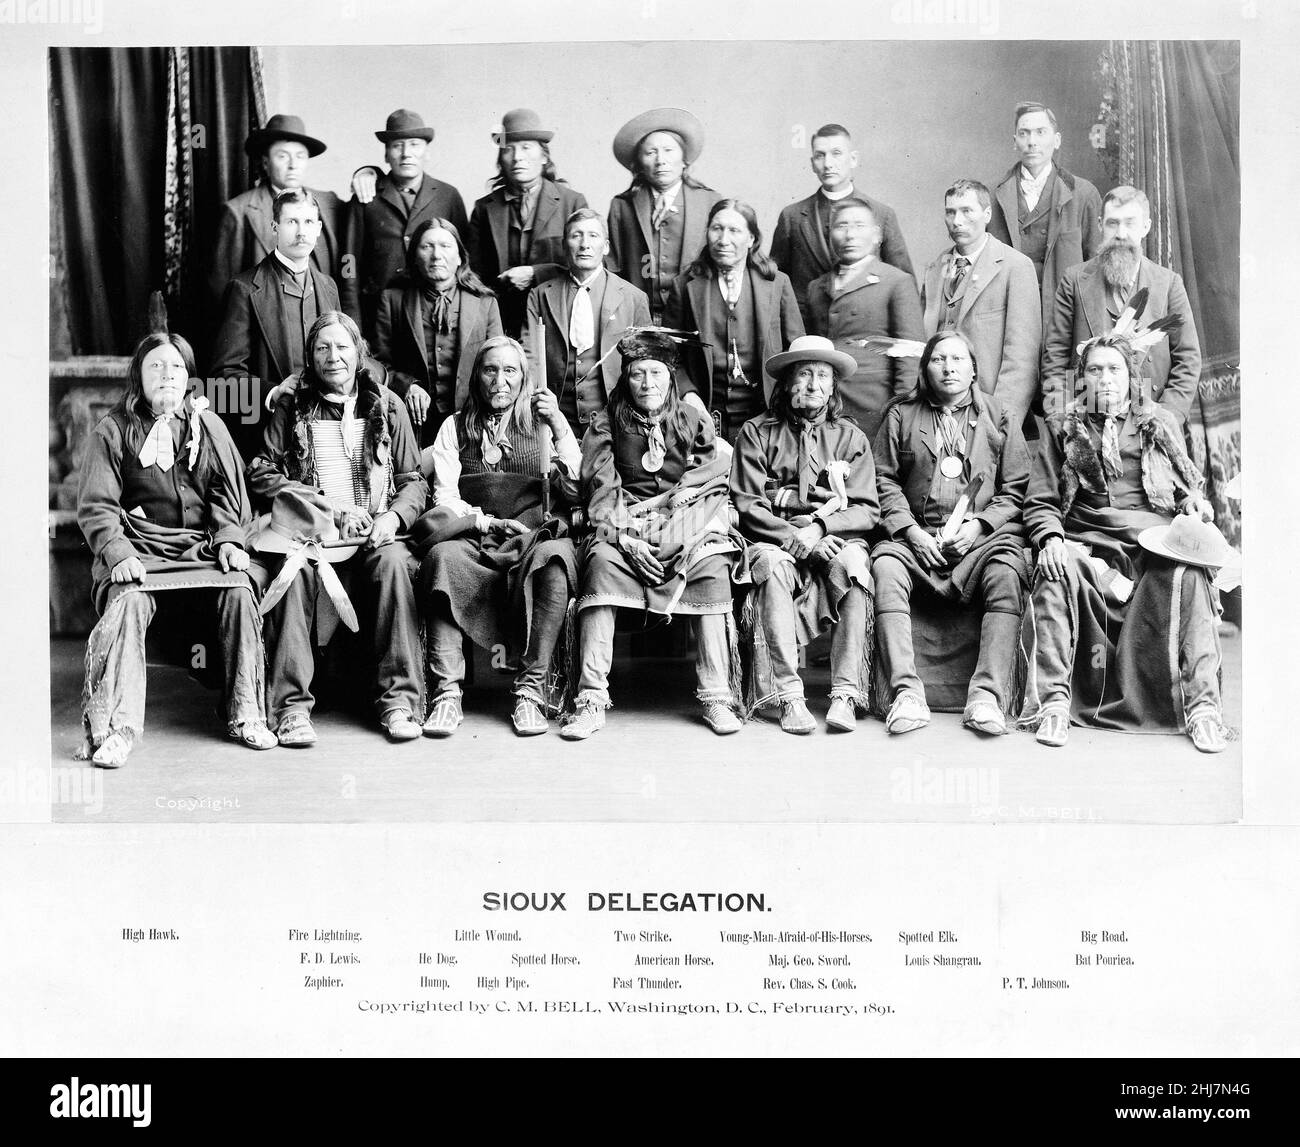 Sioux delegation 1891, Antique and vintage photo - Group of Native american / Indian / American Indians. Copyright by C.M. Bell, Washington, D.C. Stock Photo